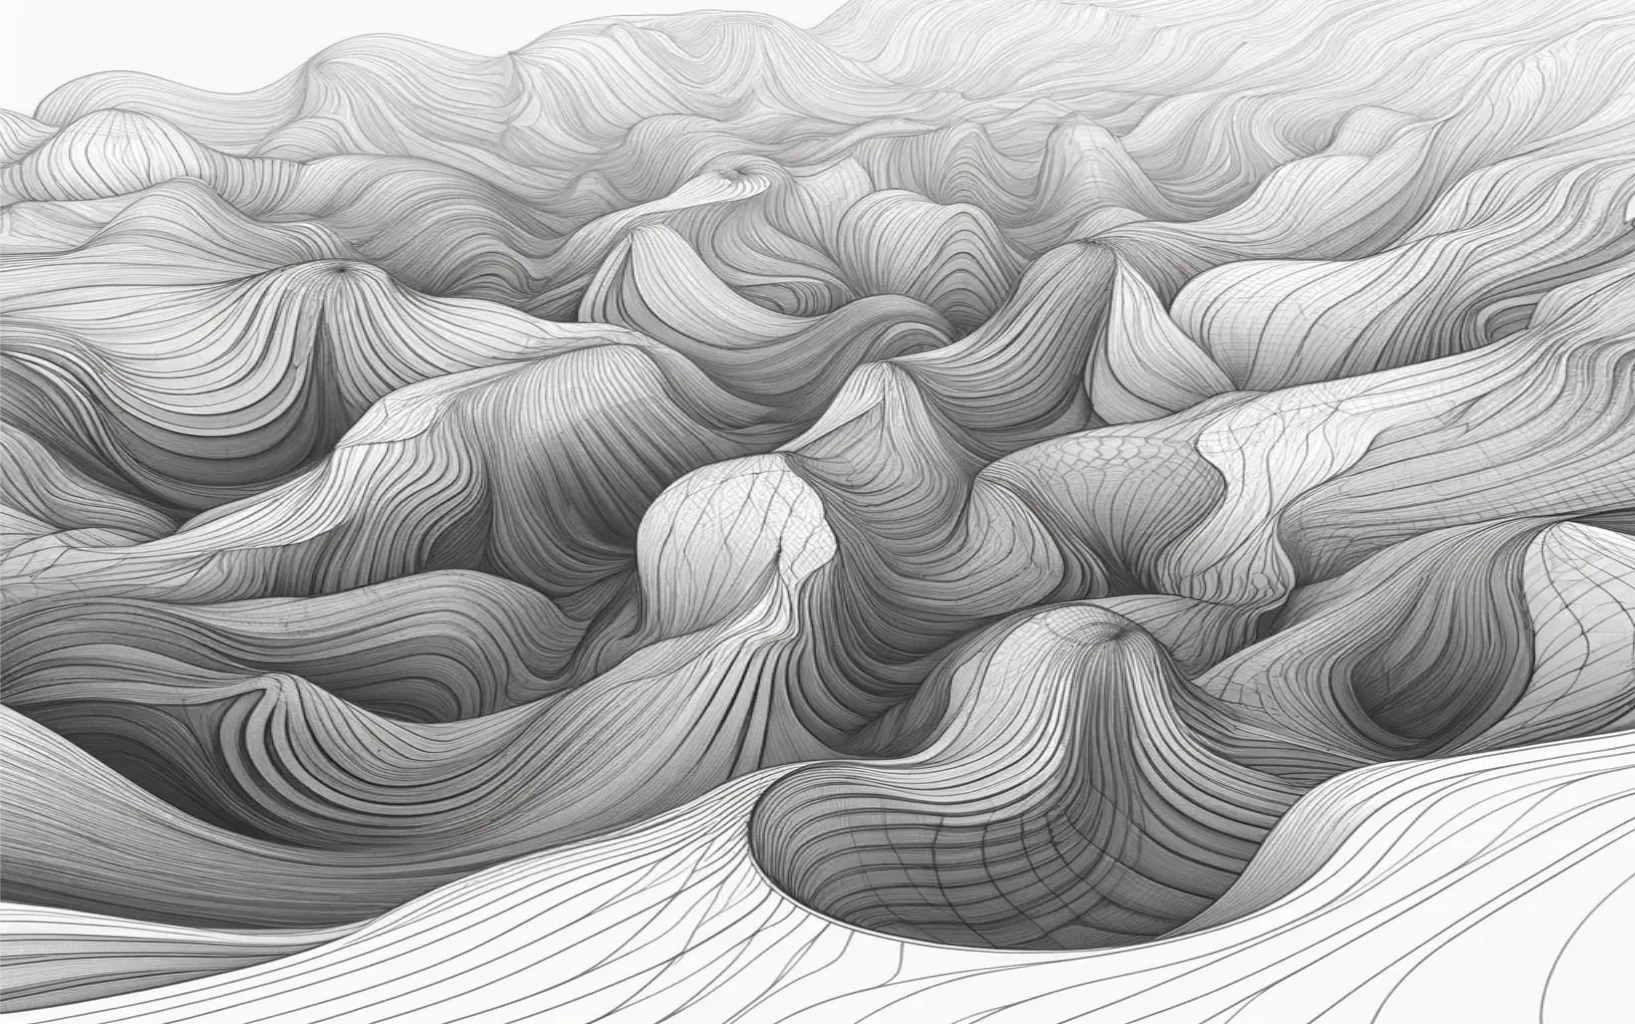 An abstract of a hilly landscape